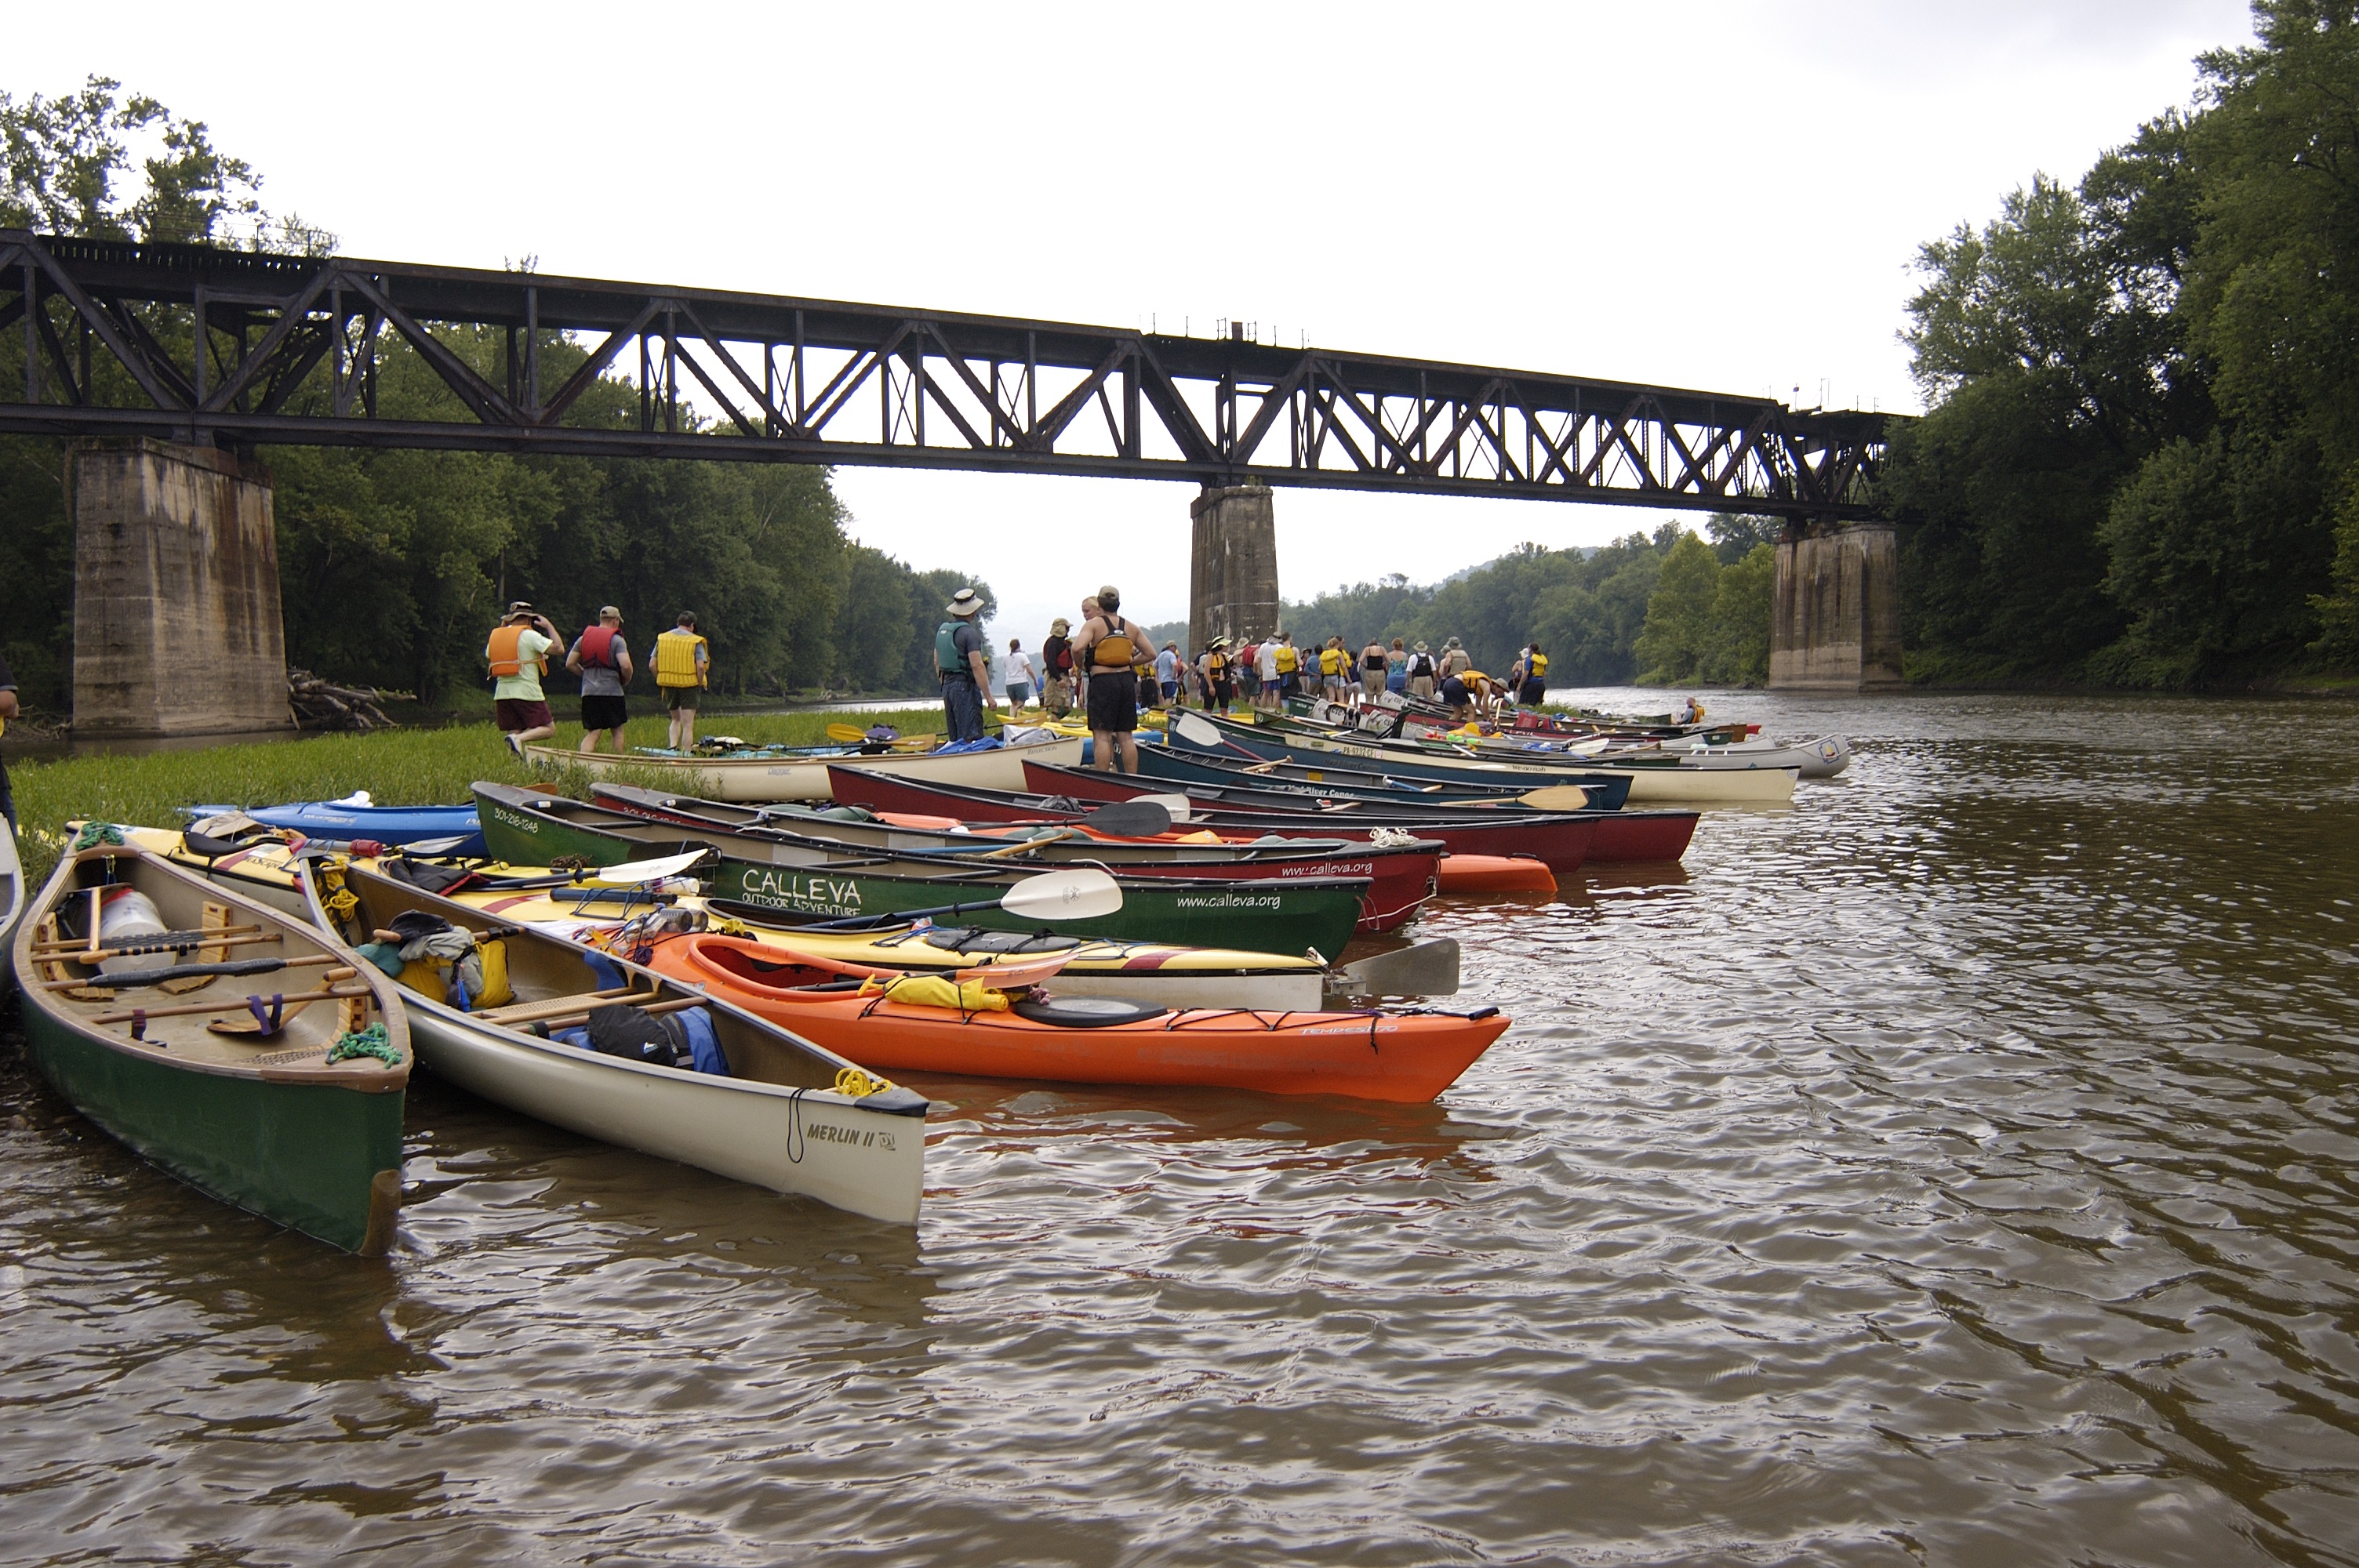 Many kayaks lined up on the shore of a river. A trestle bridge is in the background.